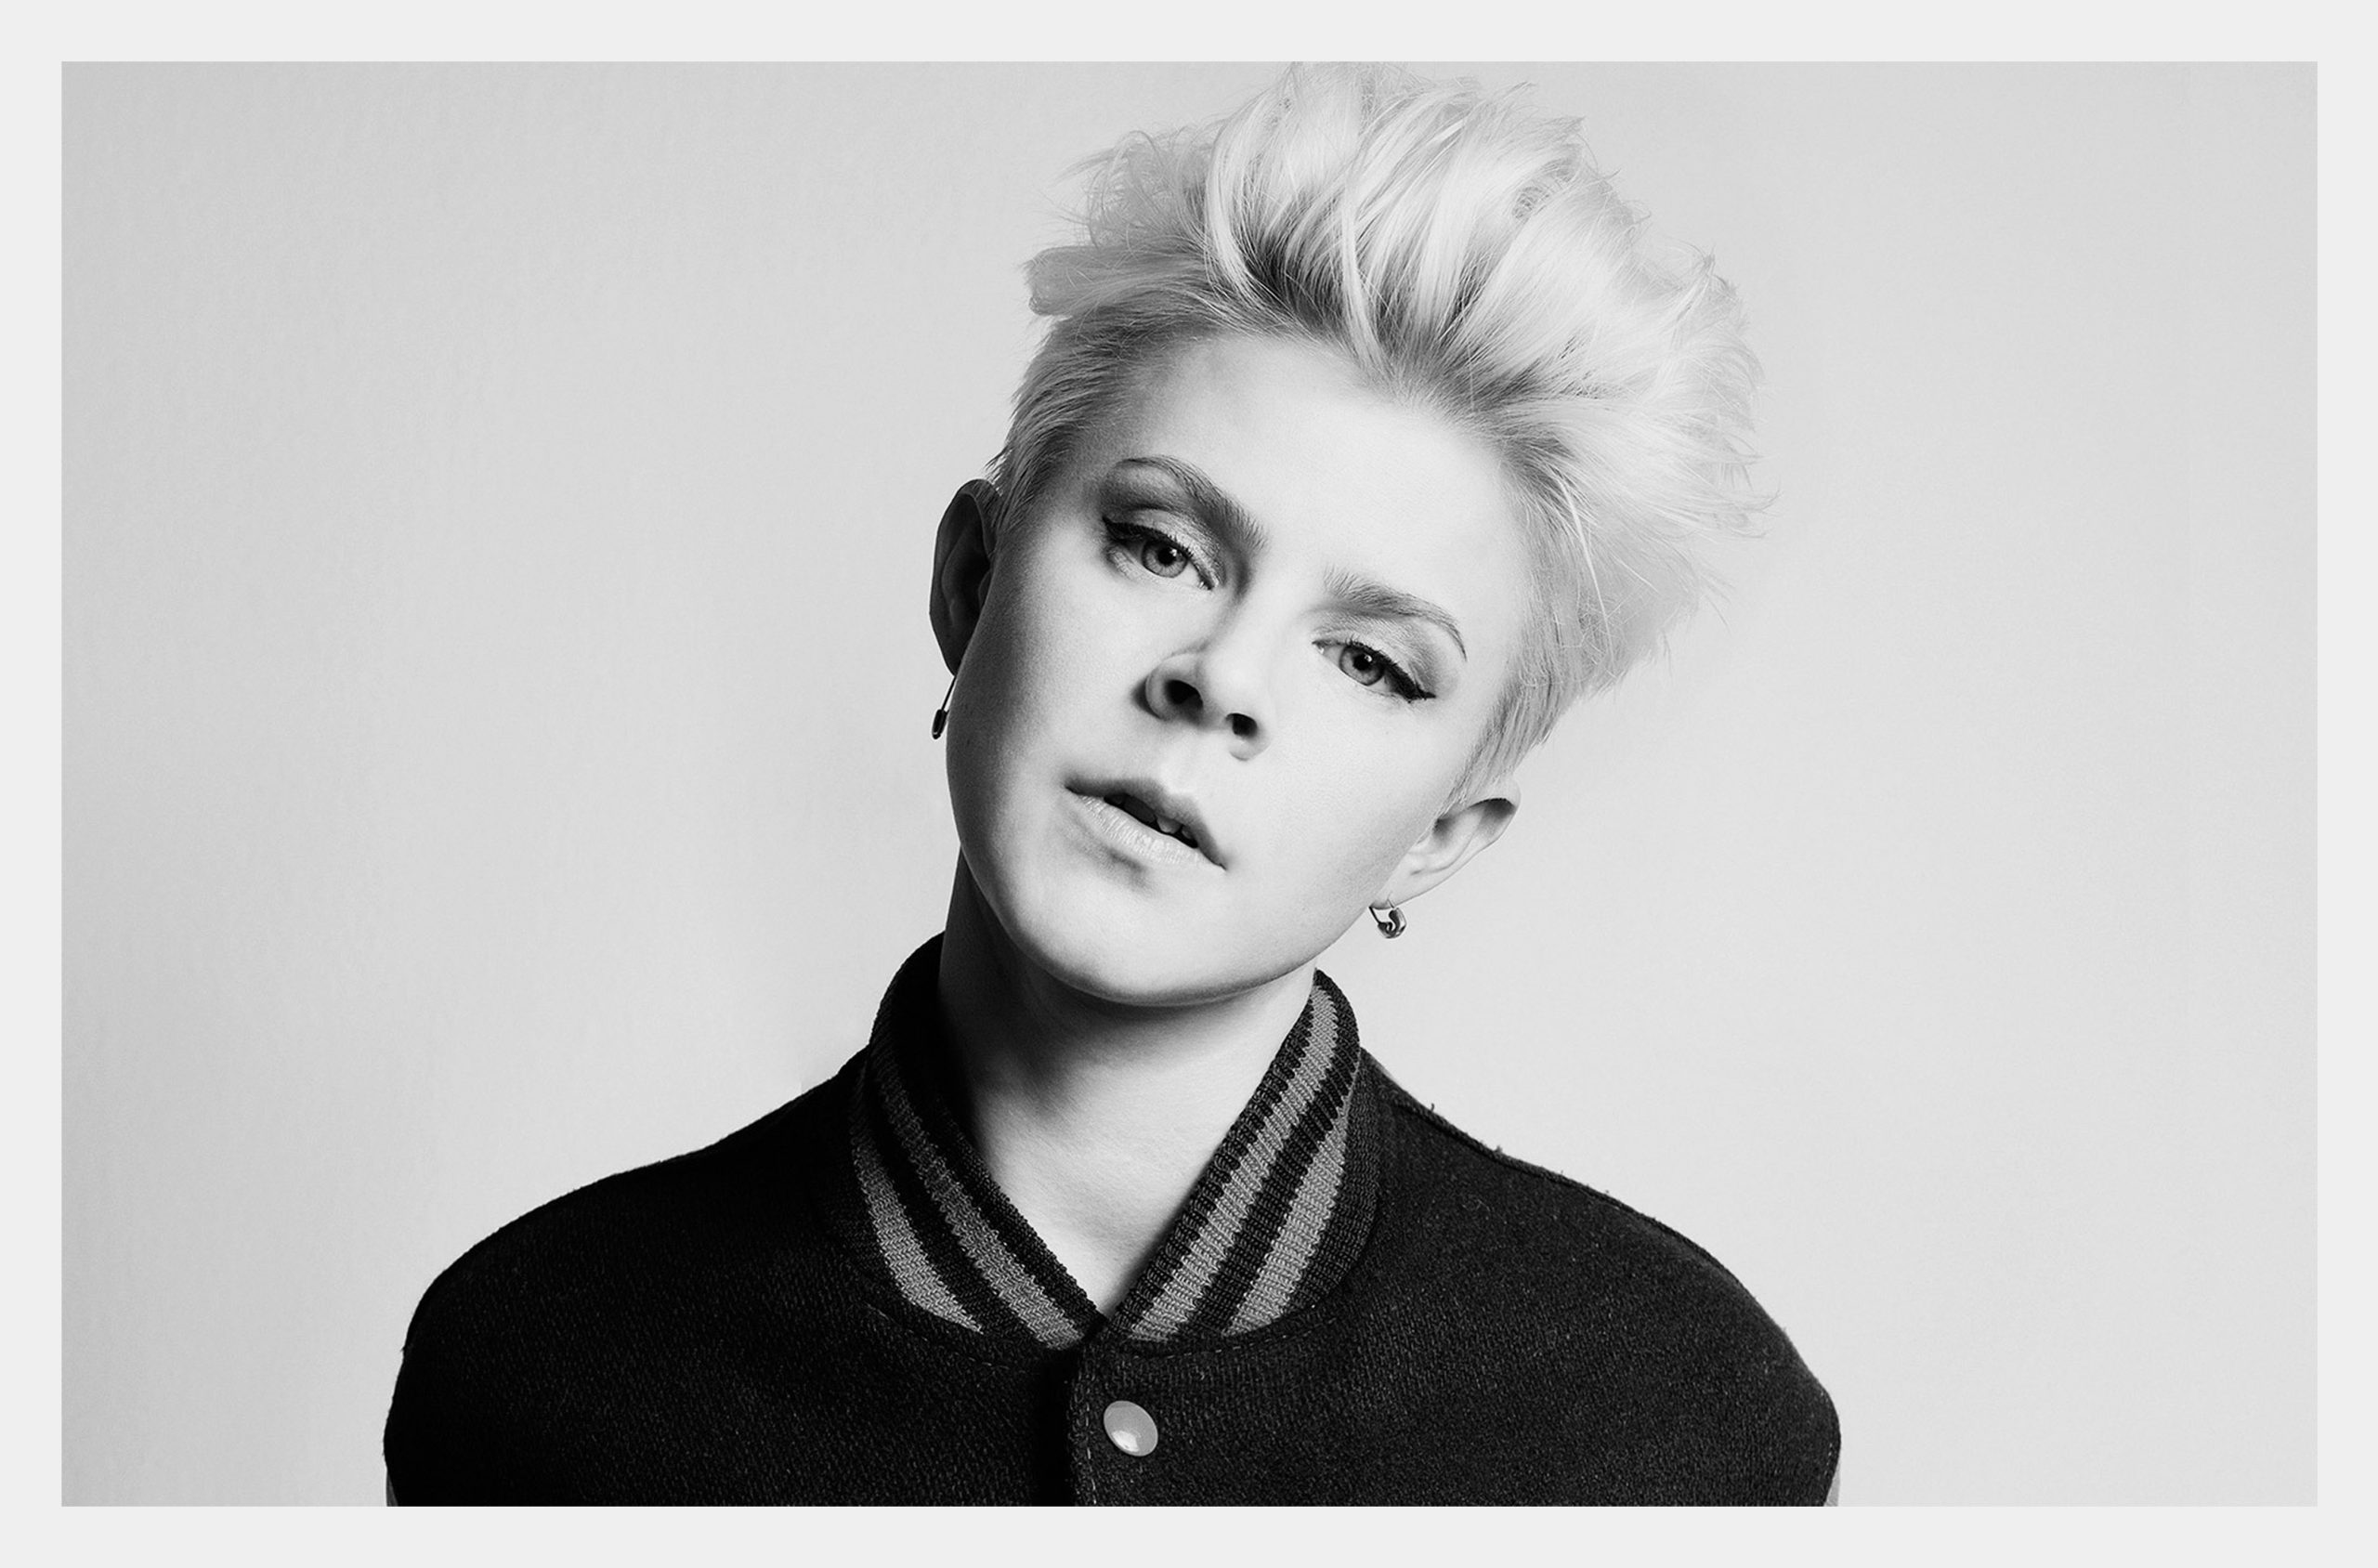 ROBYN – THE NEW YORKER